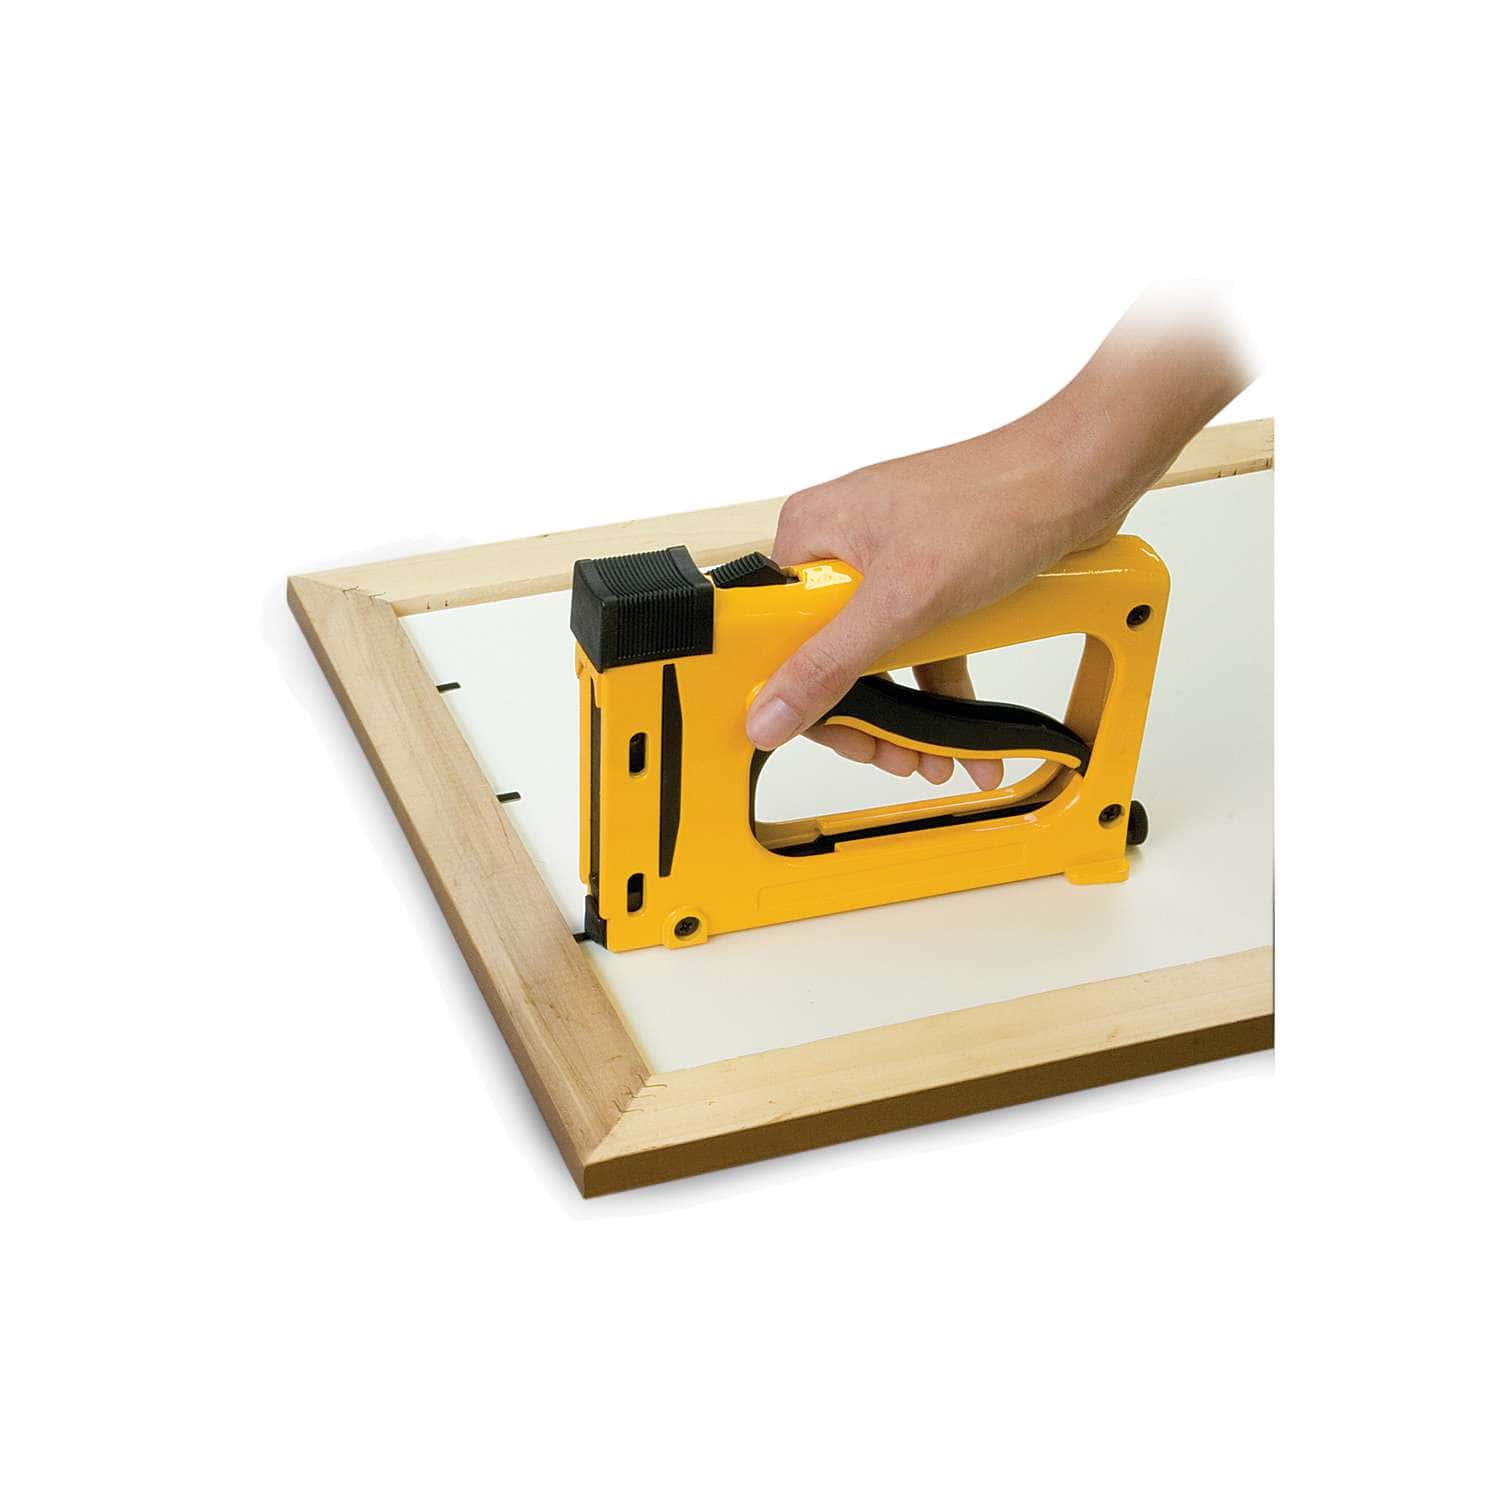 Rigid/Flexible Dual Point Driver Tool for Wooden Picture Frame Making  Artwork